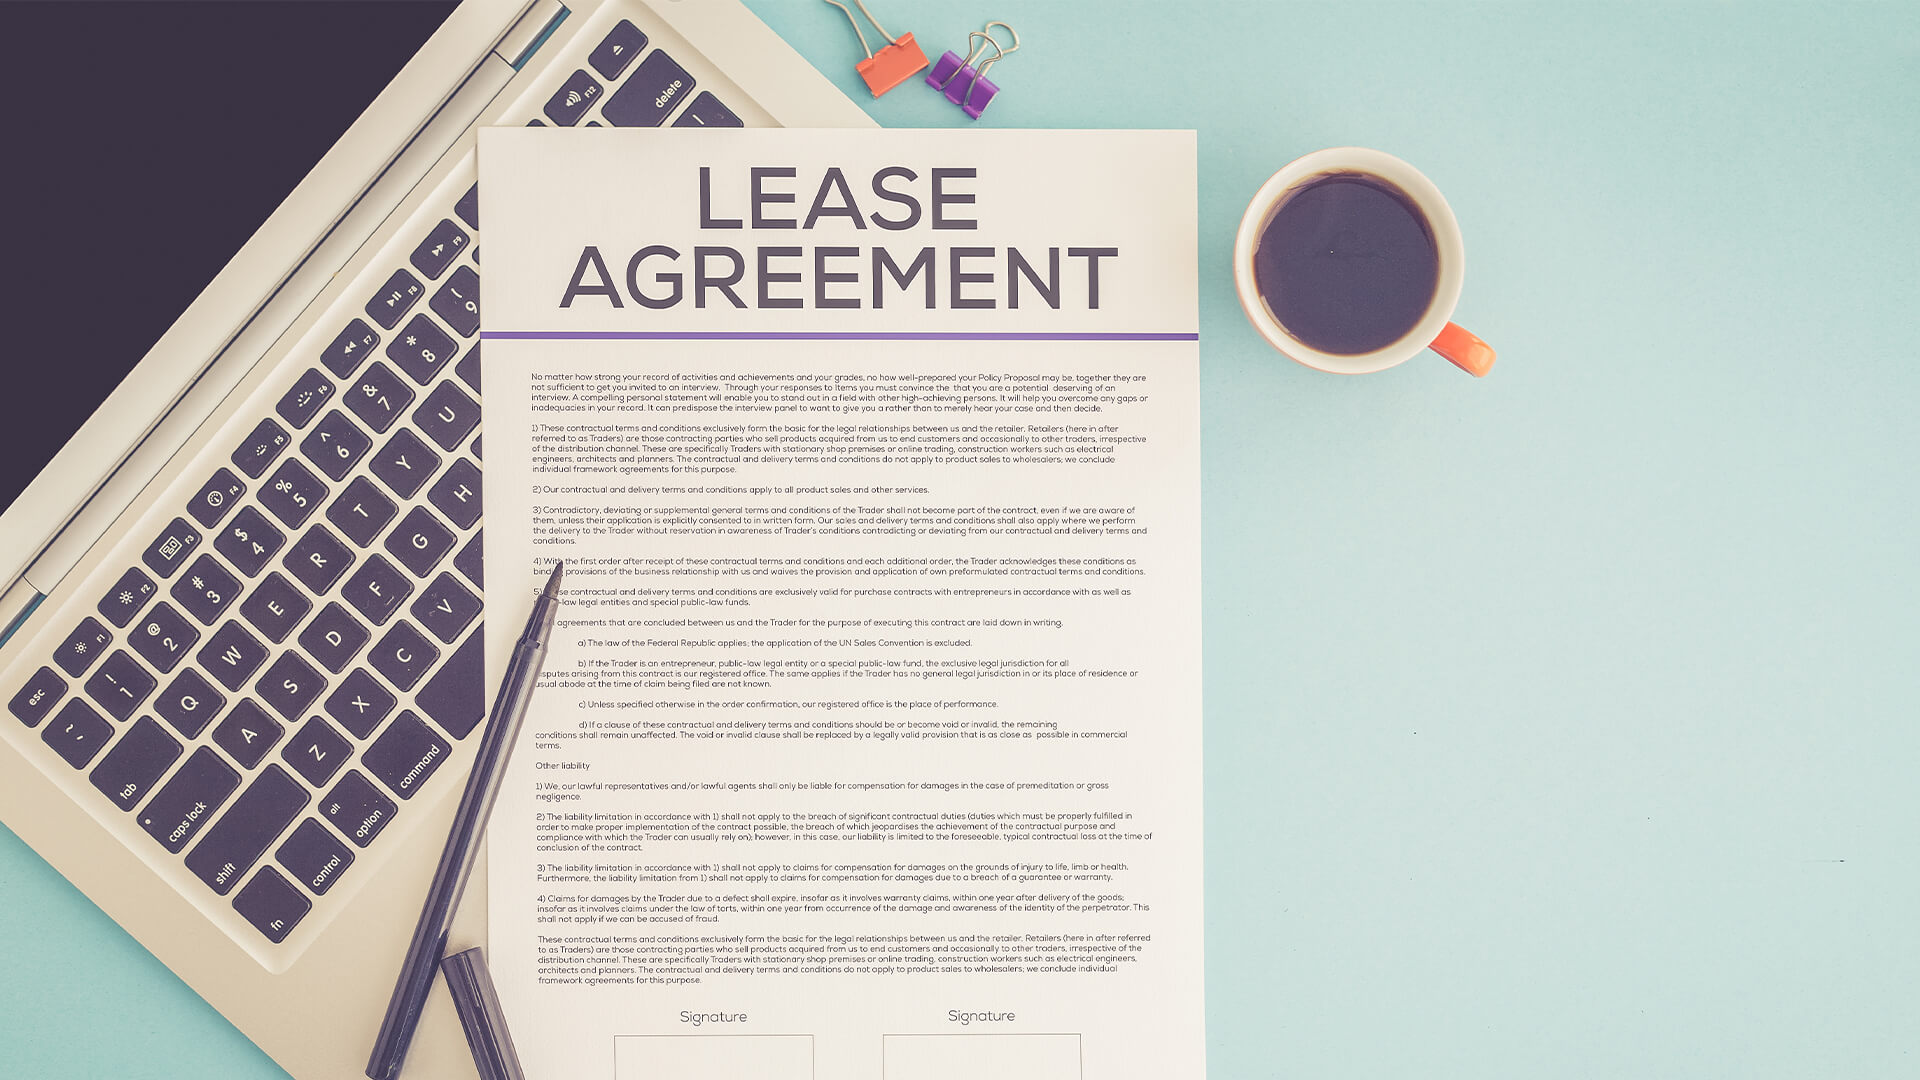 A lease agreement document next to a laptop and a cup of coffee against a blue background